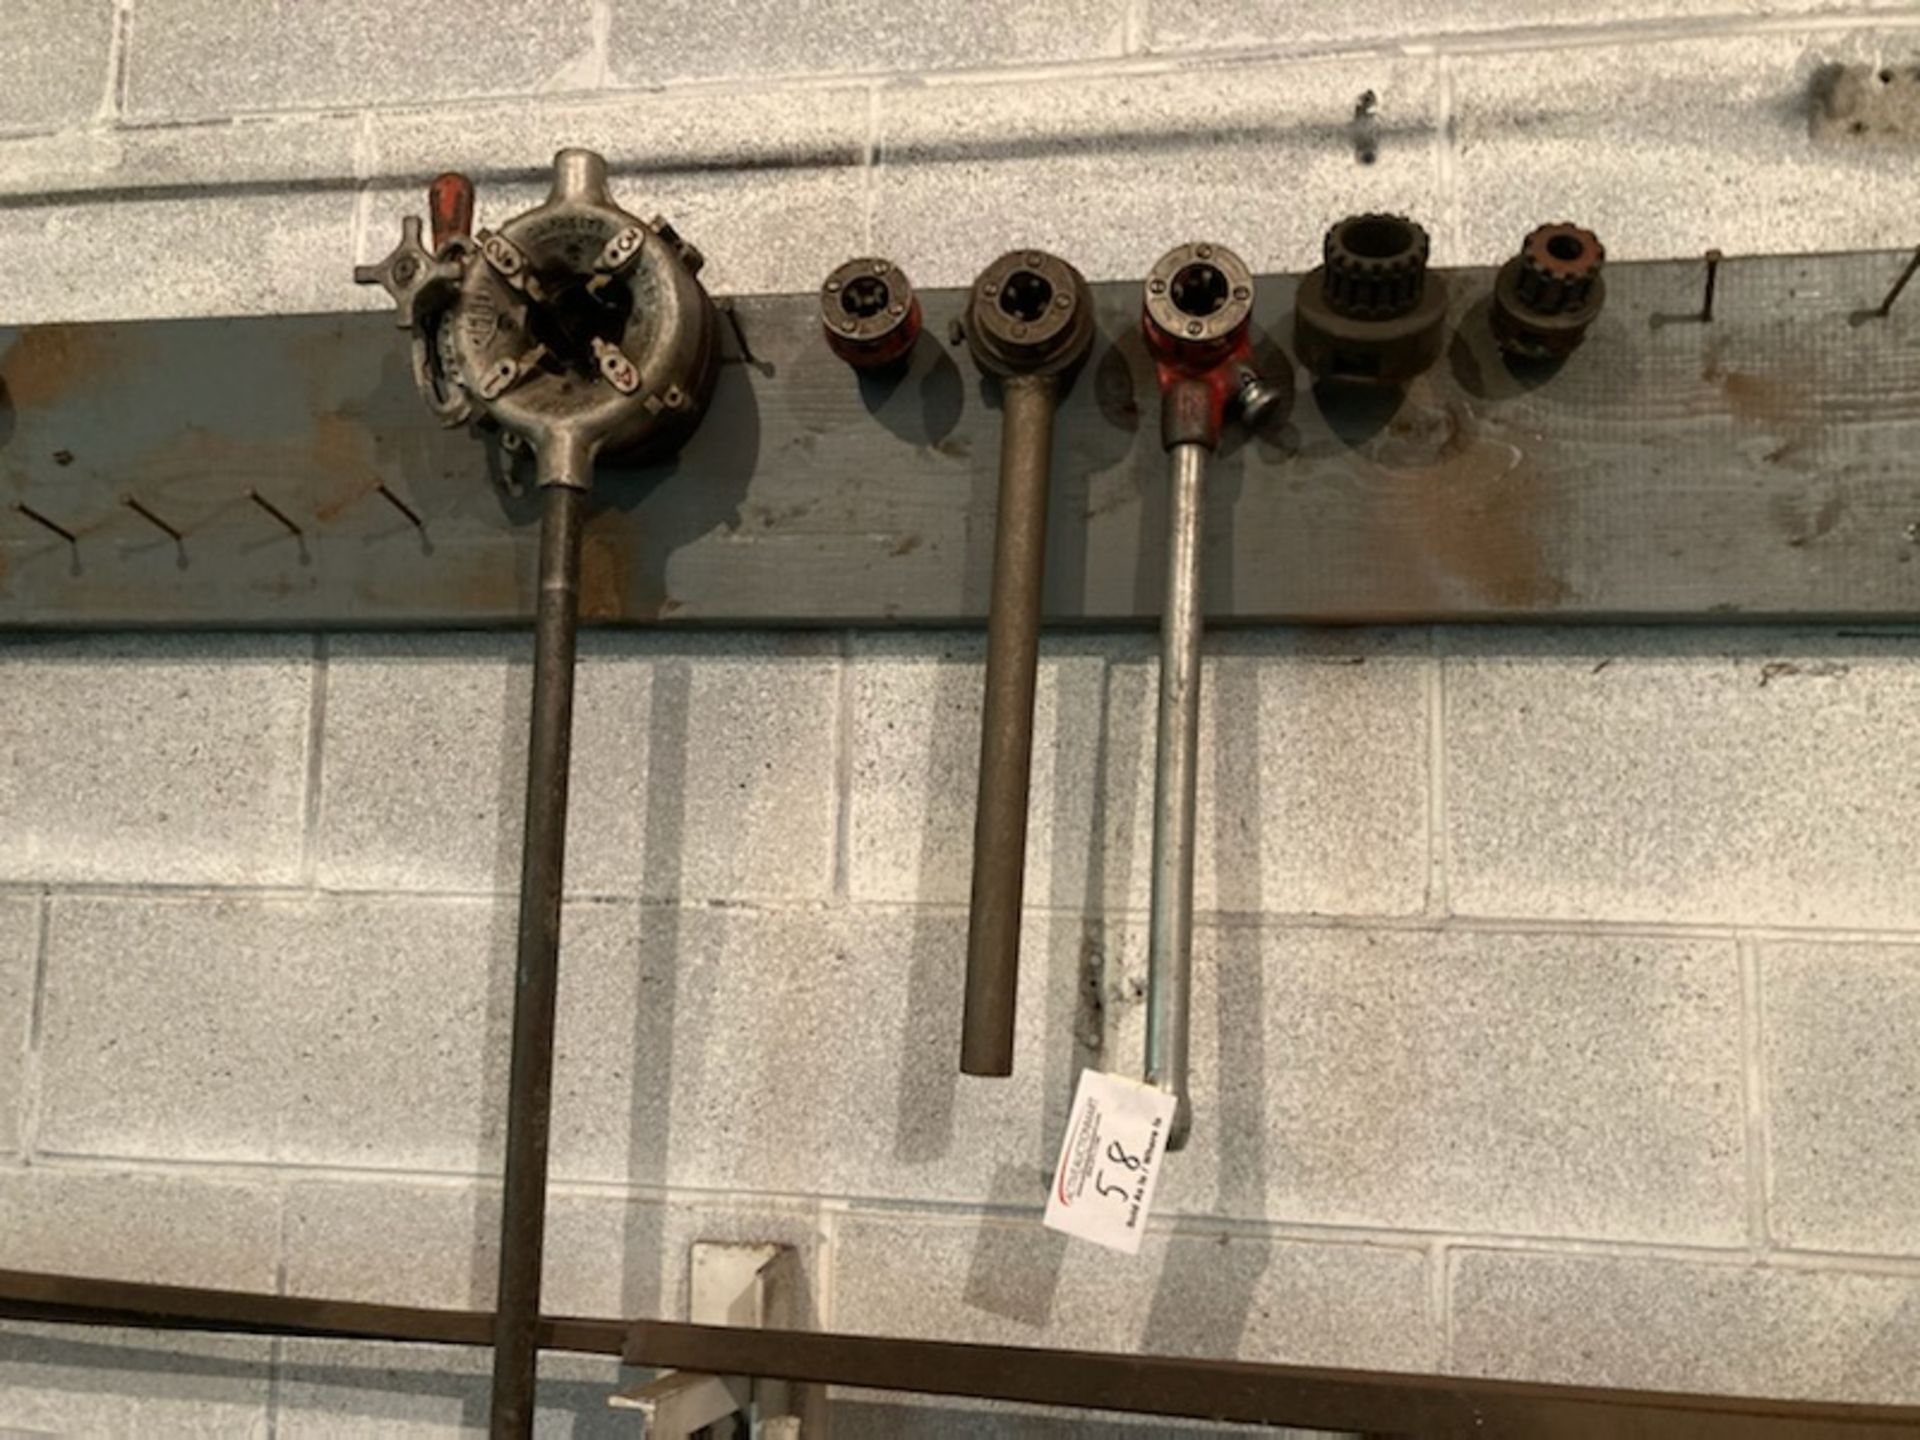 3 Pipe Threaders with Additional Threader Heads